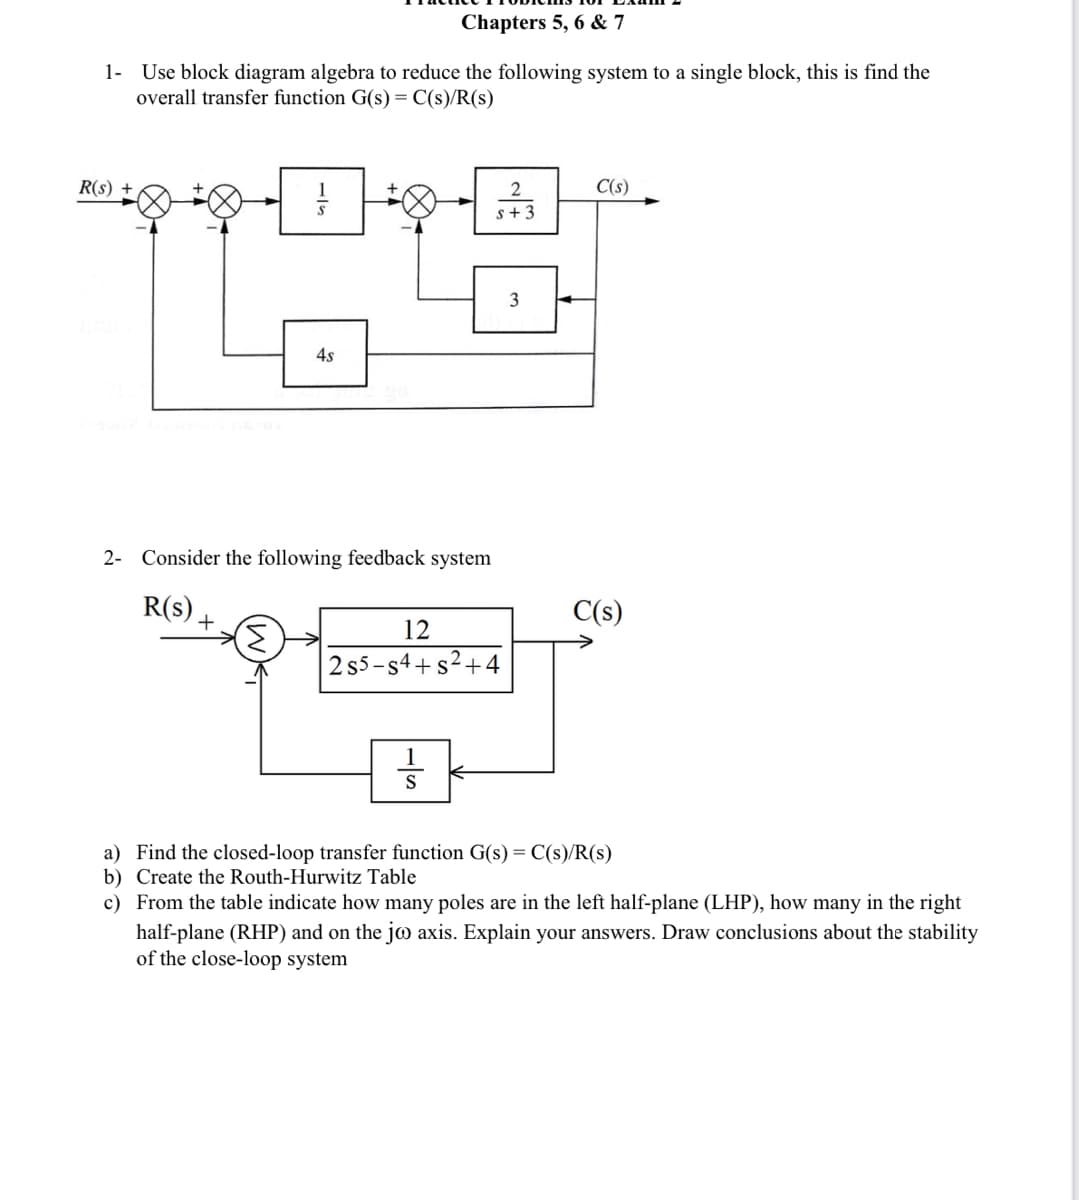 Chapters 5, 6 & 7
1- Use block diagram algebra to reduce the following system to a single block, this is find the
overall transfer function G(s) = C(s)/R(s)
R(S) +
-3
4s
2- Consider the following feedback system
R(s)
12
2 s5-s4+s²+
S
2
s+ 3
3
C(s)
C(s)
a) Find the closed-loop transfer function G(s) = C(s)/R(s)
b) Create the Routh-Hurwitz Table
the right
c) From the table indicate how many poles are in the left half-plane (LHP), how many
half-plane (RHP) and on the jo axis. Explain your answers. Draw conclusions about the stability
of the close-loop system